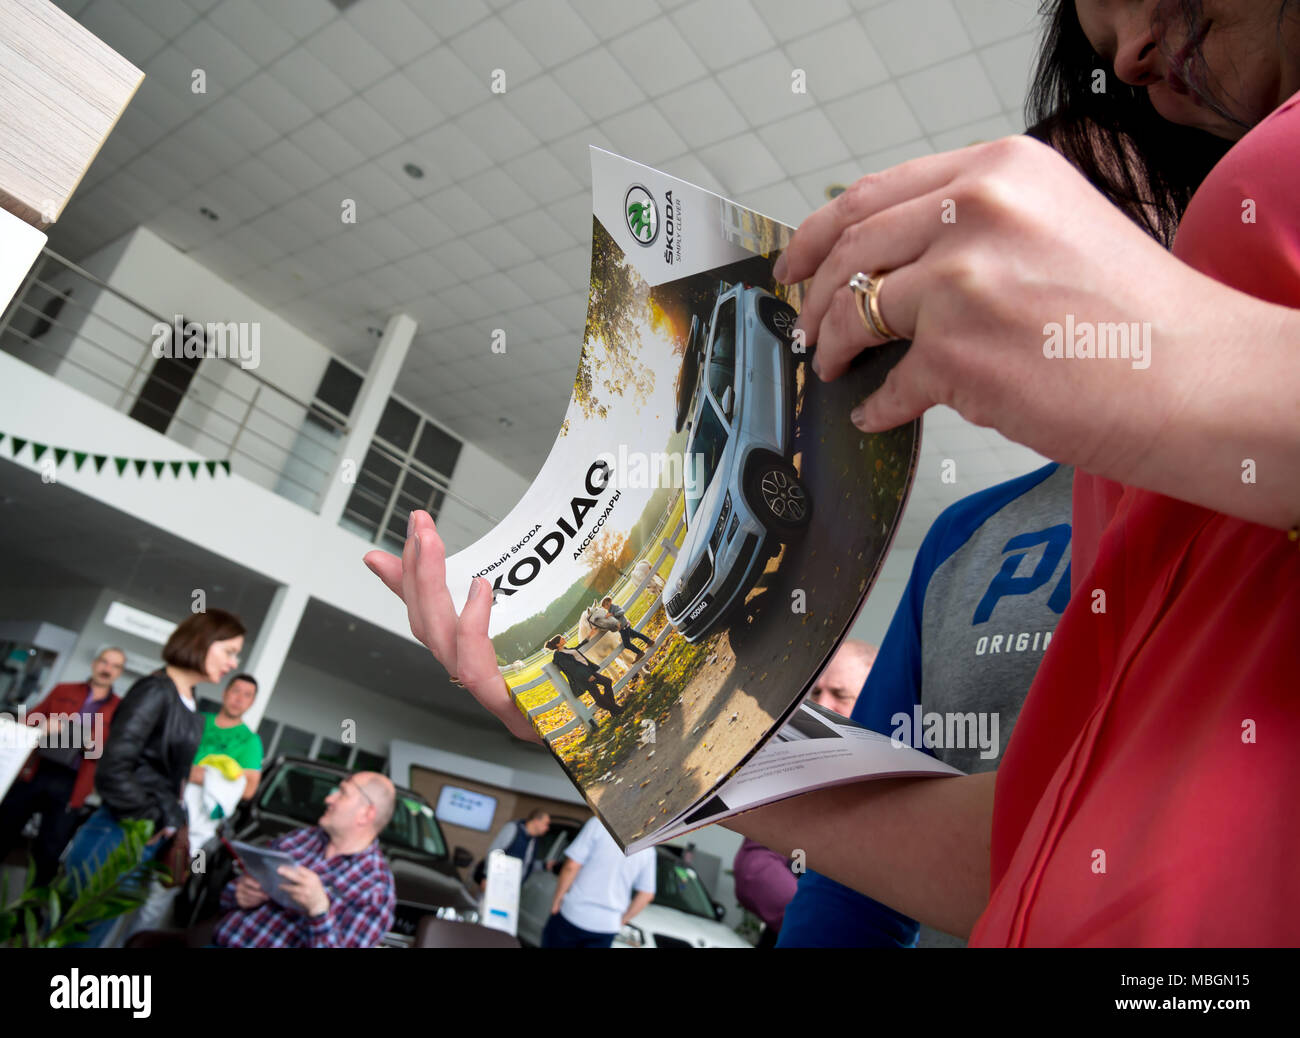 Voronezh, Russia - June 04, 2017: The new catalog of the car Skoda Kodiaq in the hands of the visitor Stock Photo